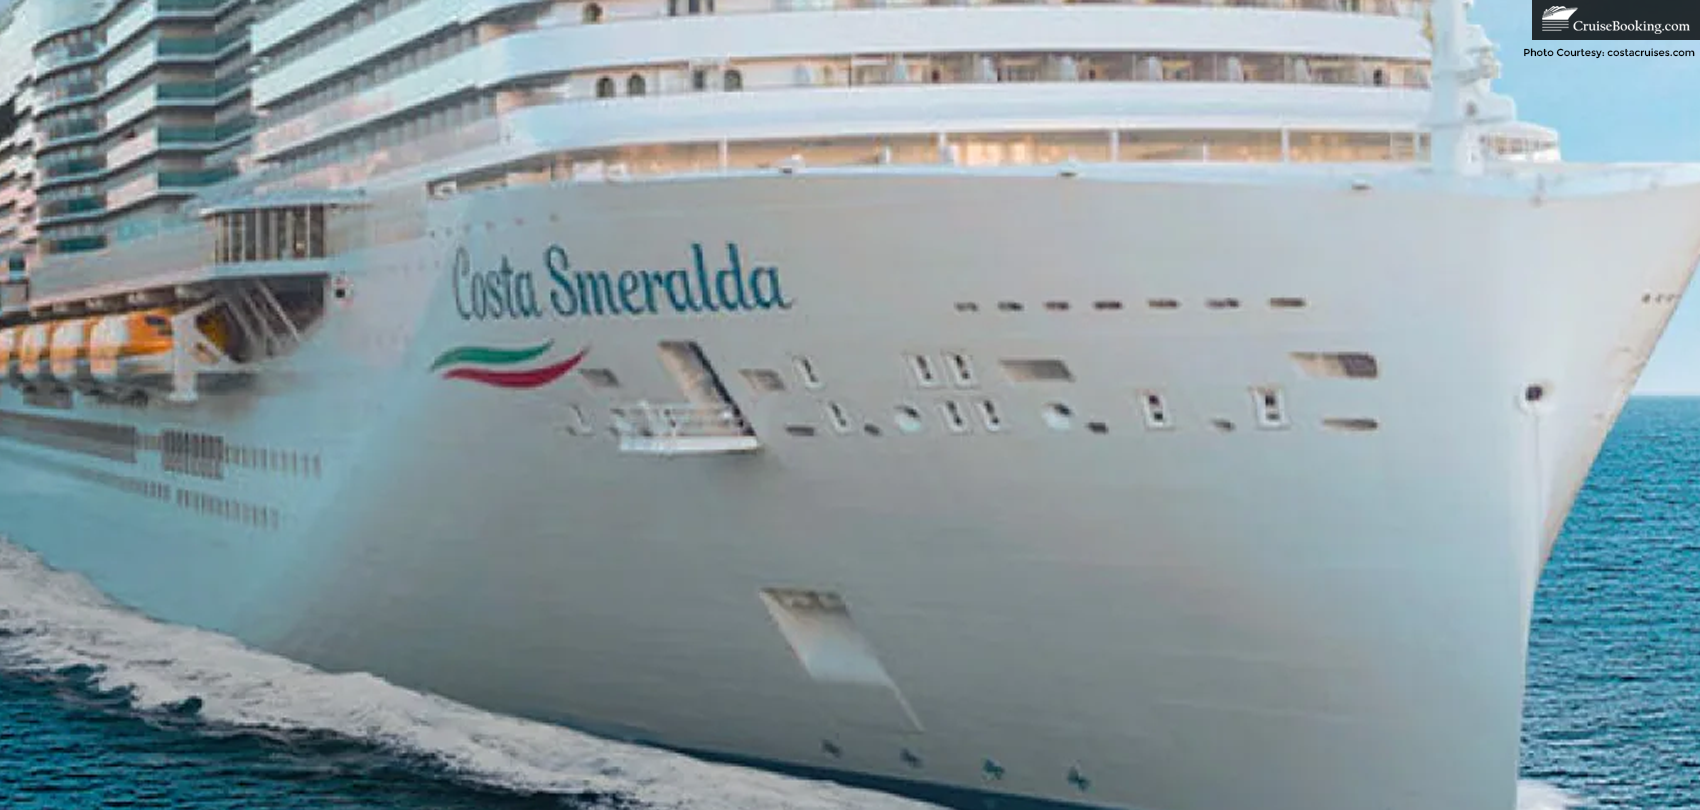 Costa is Promoting its Late Summer and Fall Cruises in the Mediterranean